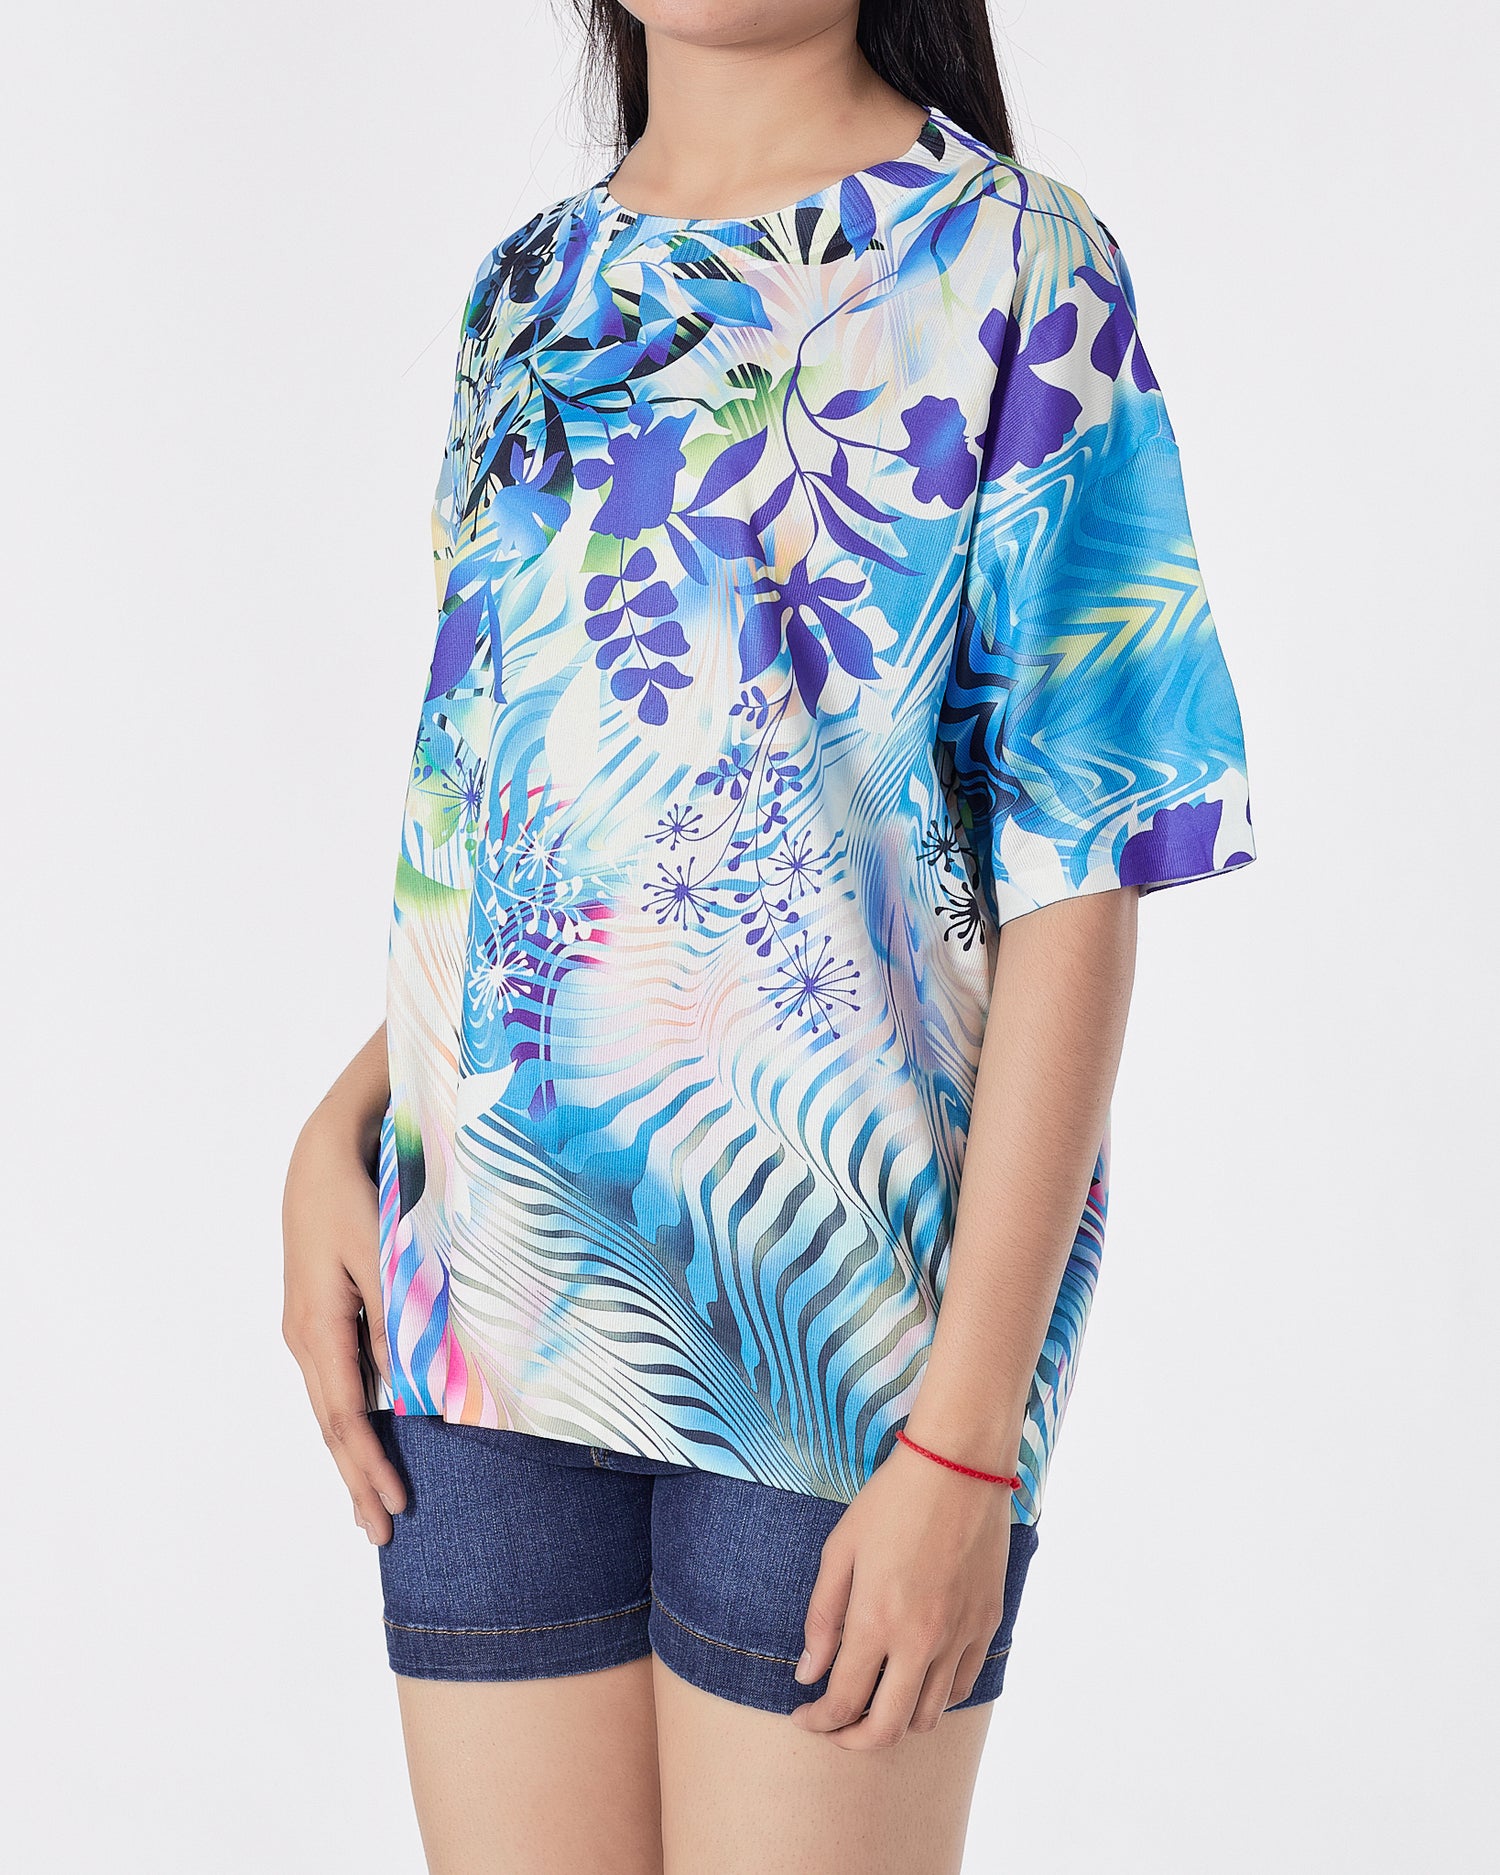 Floral Over Printed Lady T-Shirt 15.90